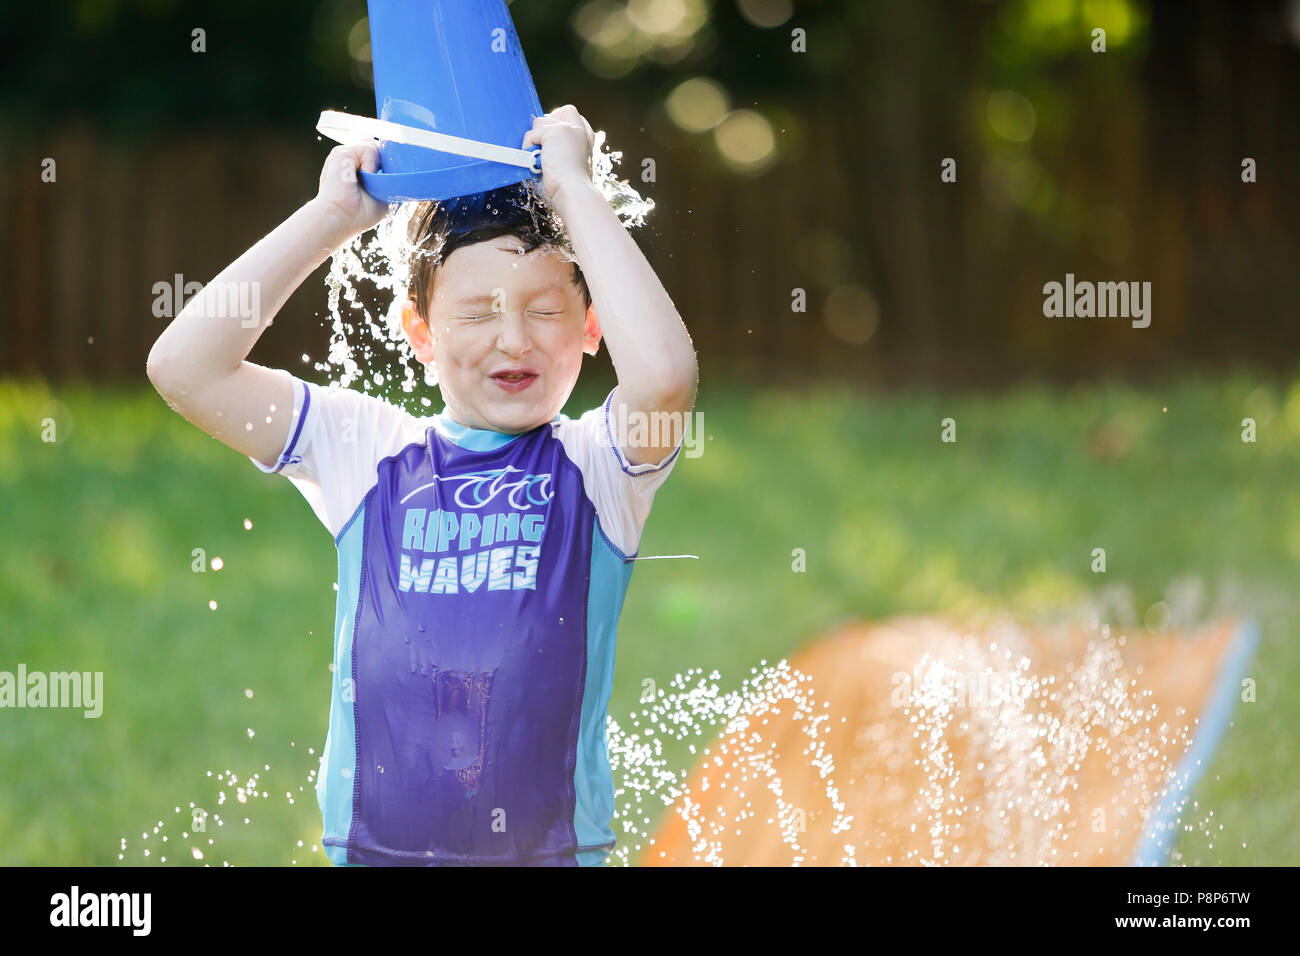 Dumping Bucket On Head High Resolution Stock Photography and Images - Alamy